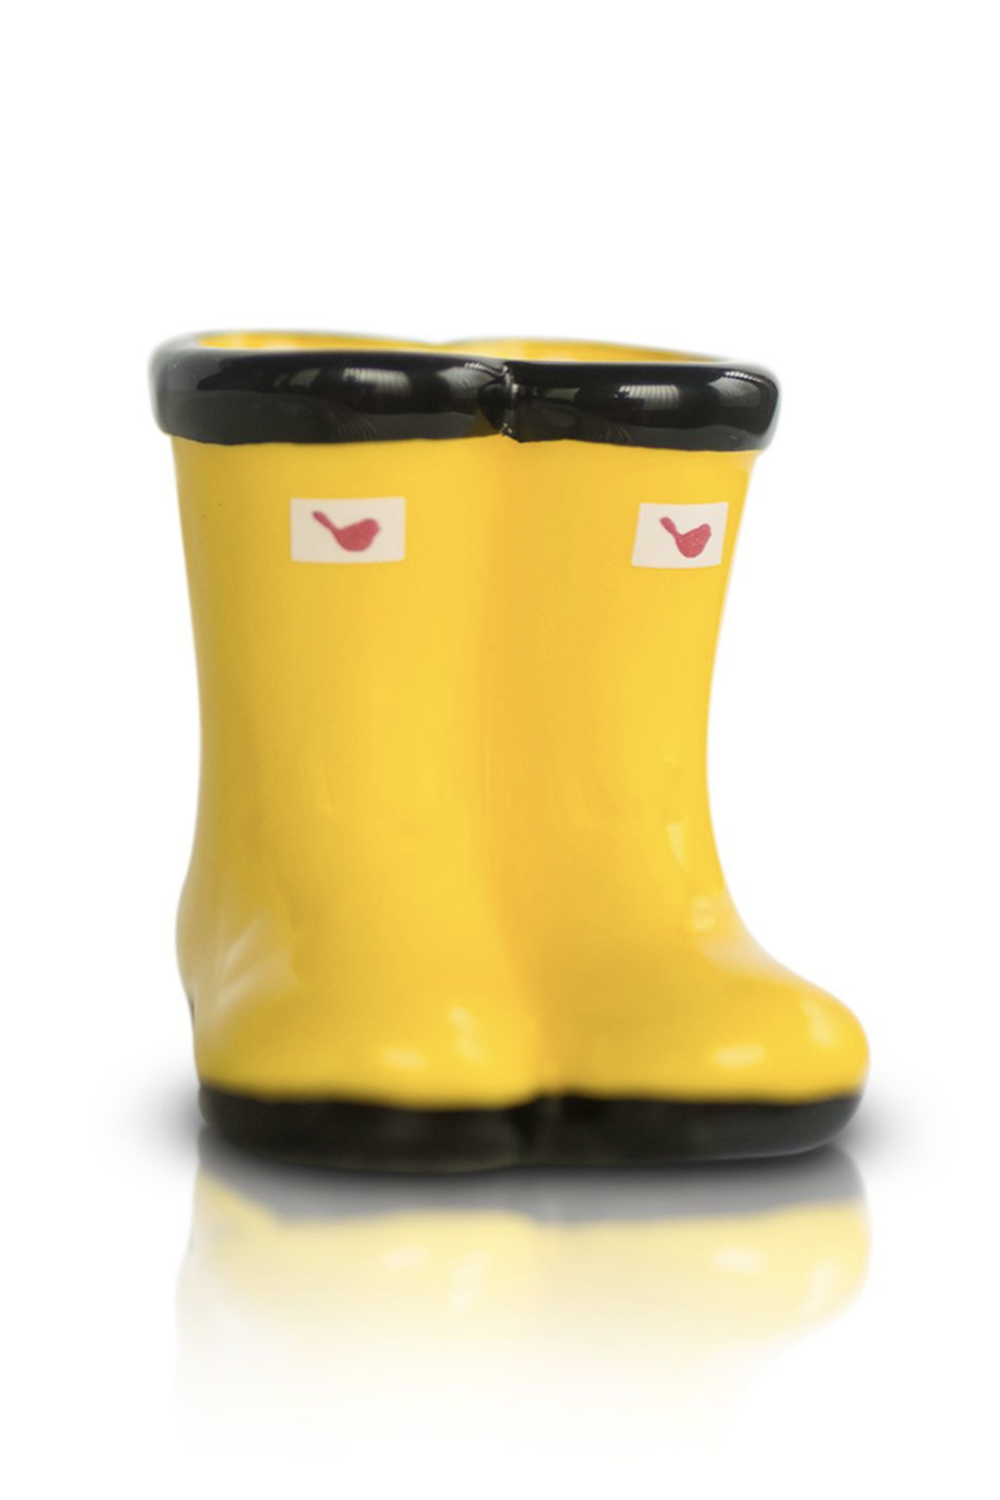 Nora Fleming Mini Attachment - St. Jude Yellow Jumpin' Puddles Galoshes